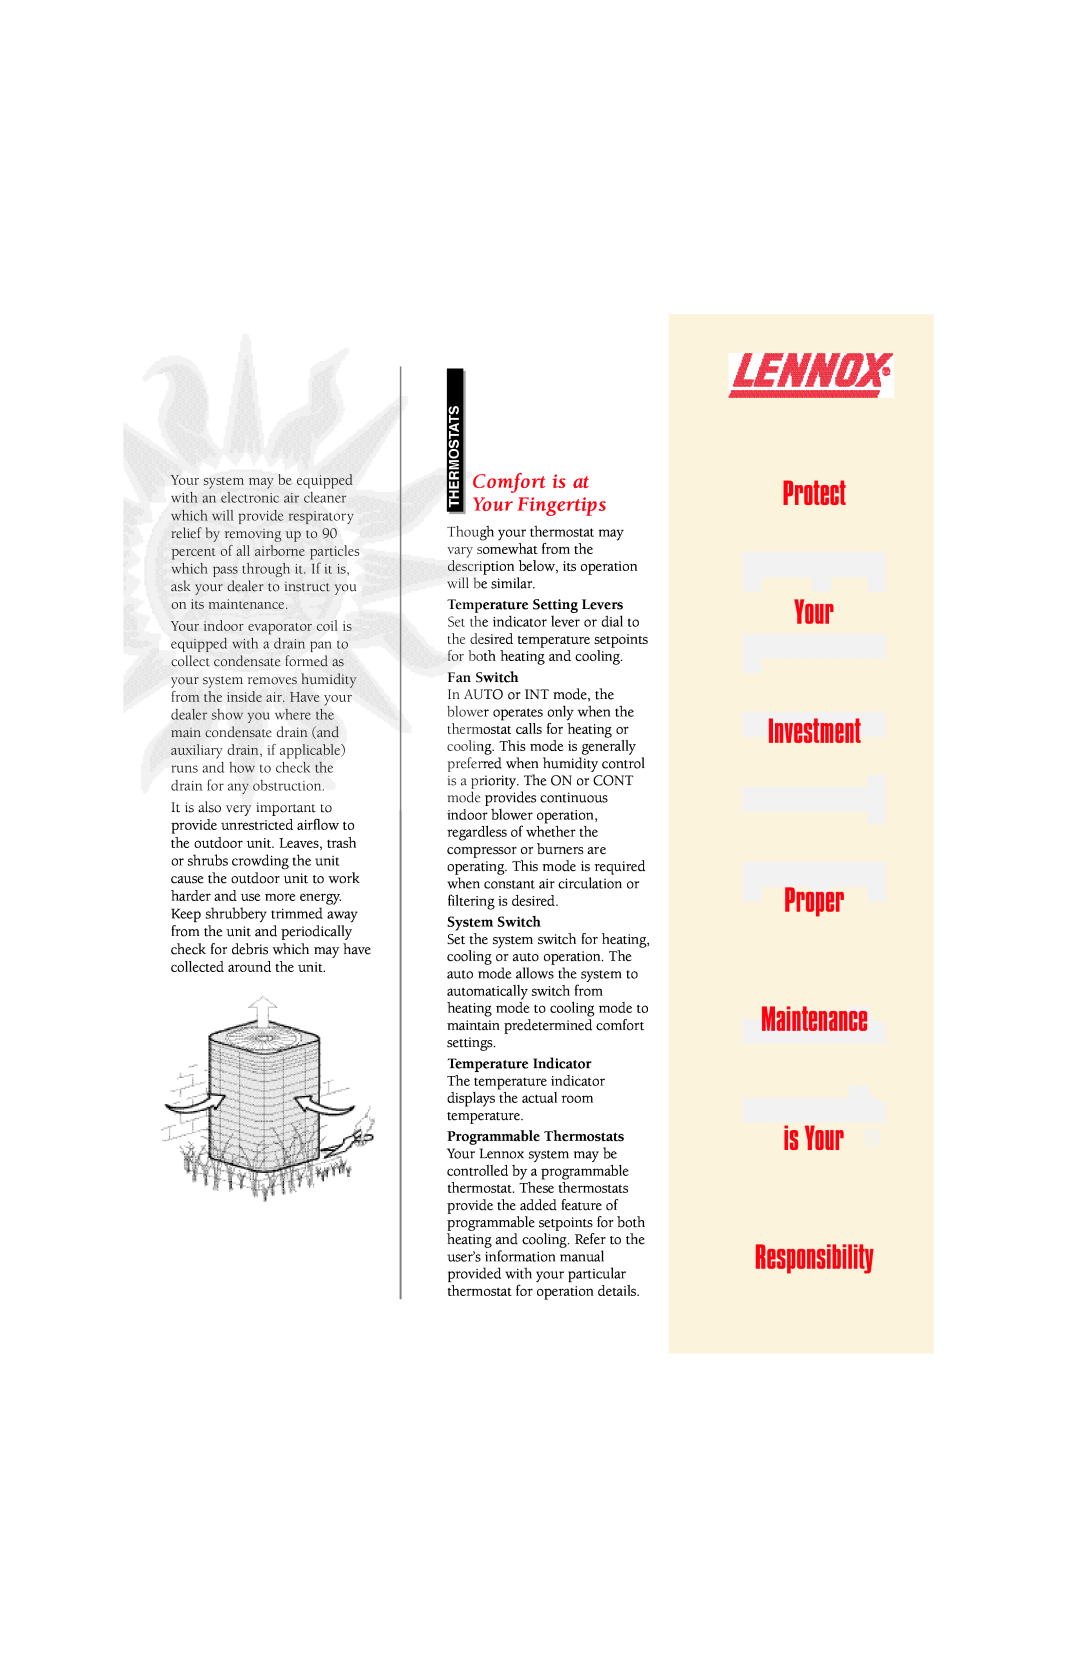 Lennox International Inc 11 owner manual Comfort is at Your Fingertips, Protect Your Investment Proper Maintenance 